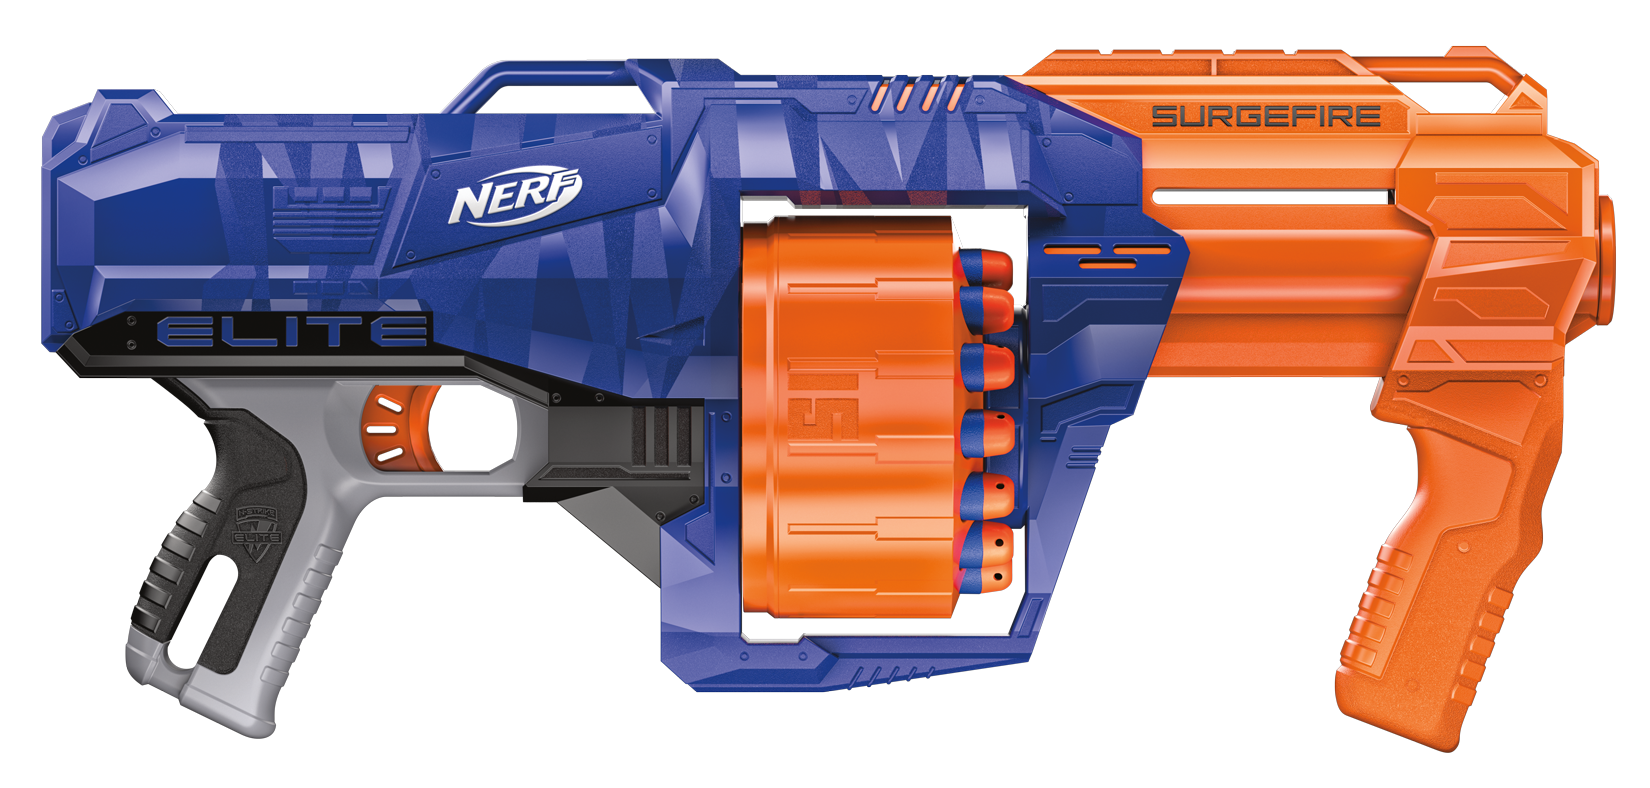 Nerf News: 2018 Spring Blasters - Official Product Details | Blaster Hub